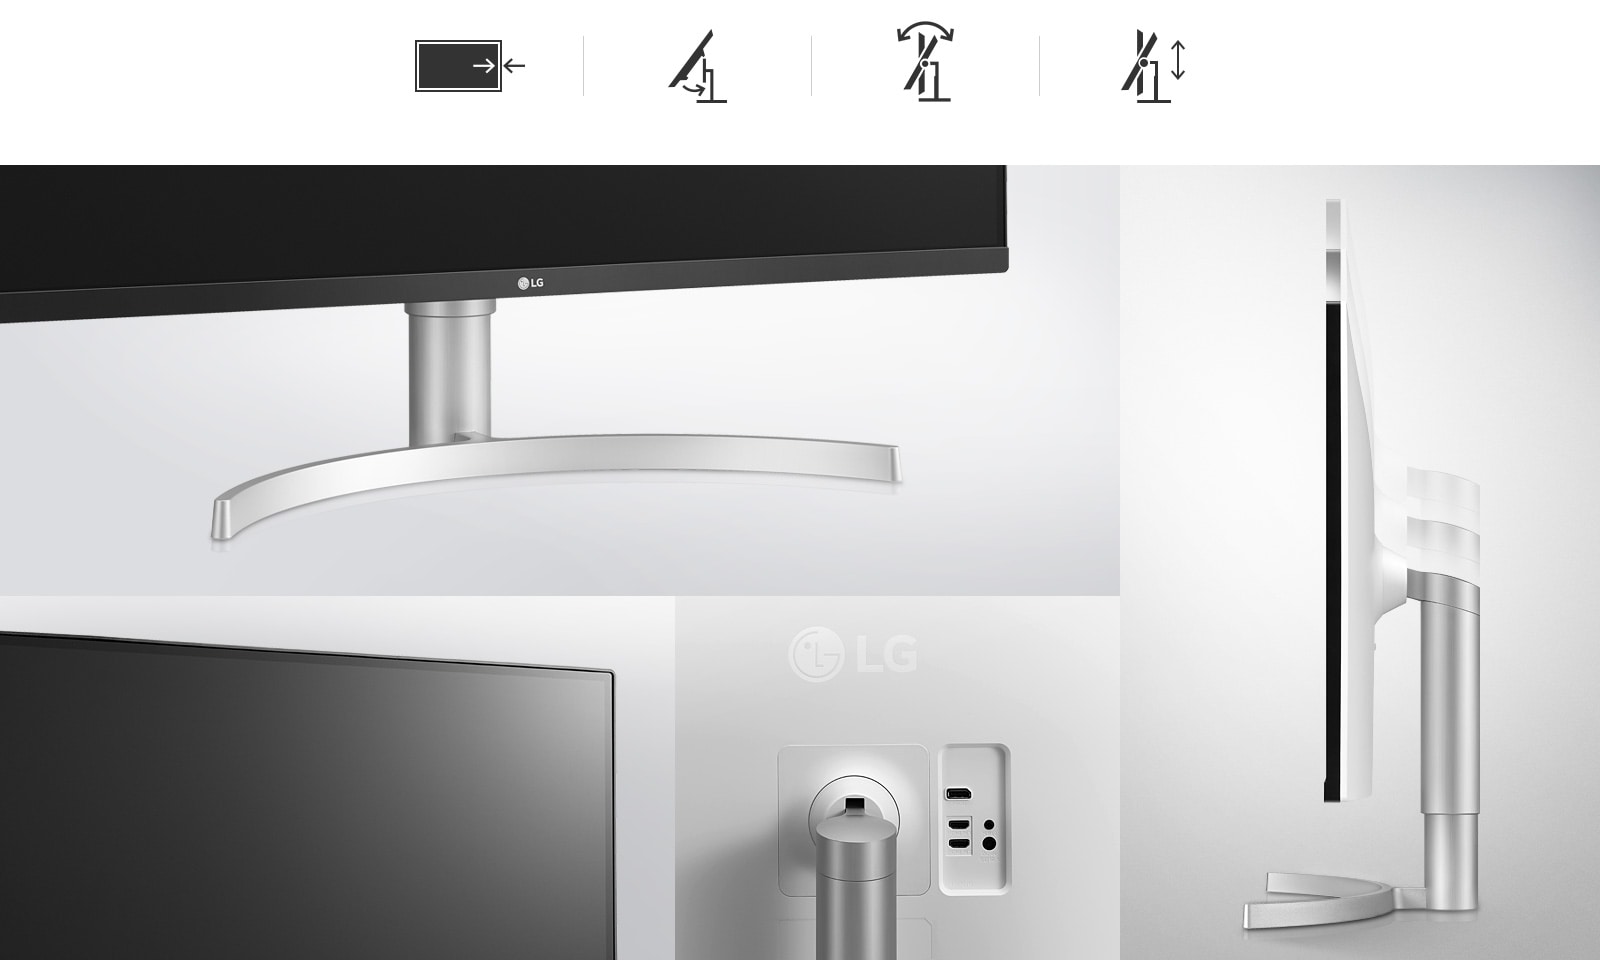 Height & Tilt adjustment, One-Click stand, and 3-Side Virtually Borderless design